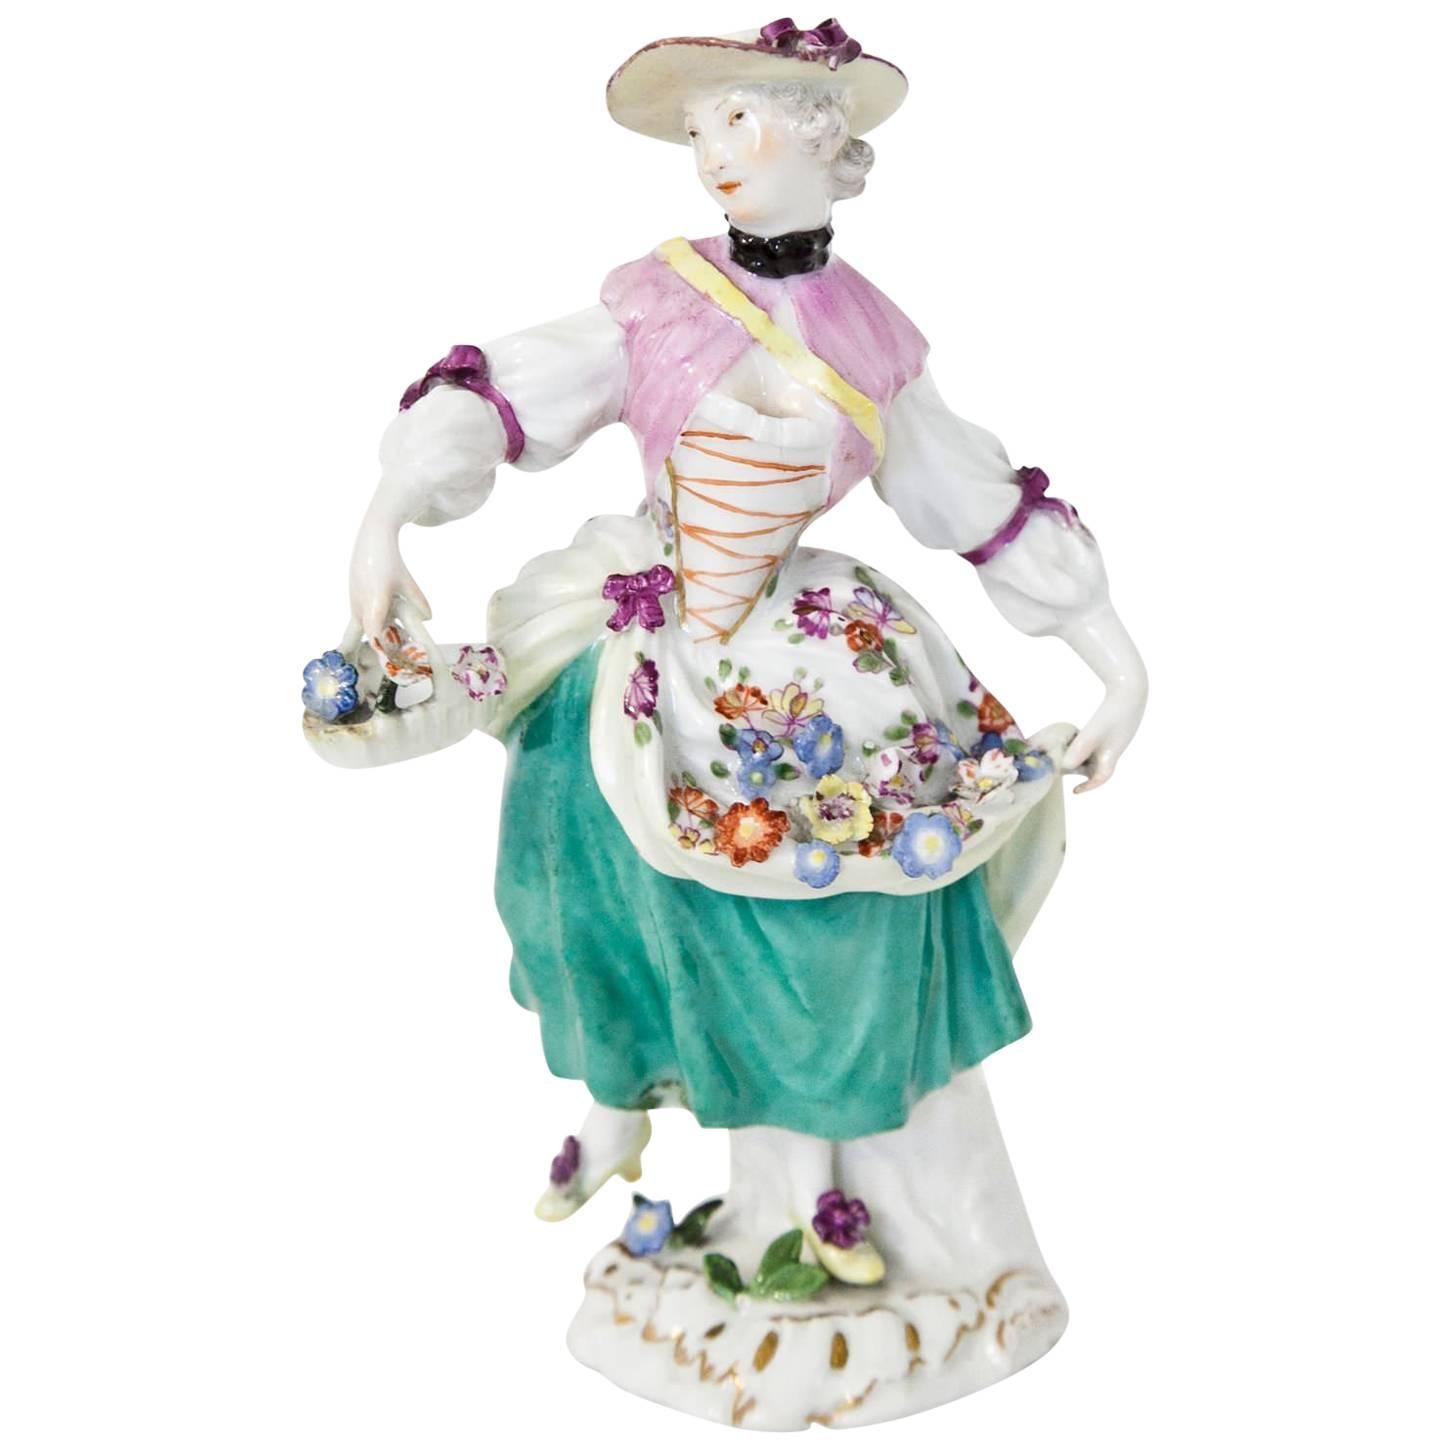 Porcelain Figurine of a Girl with Flowers after Kaendler, Meissen, circa 1750